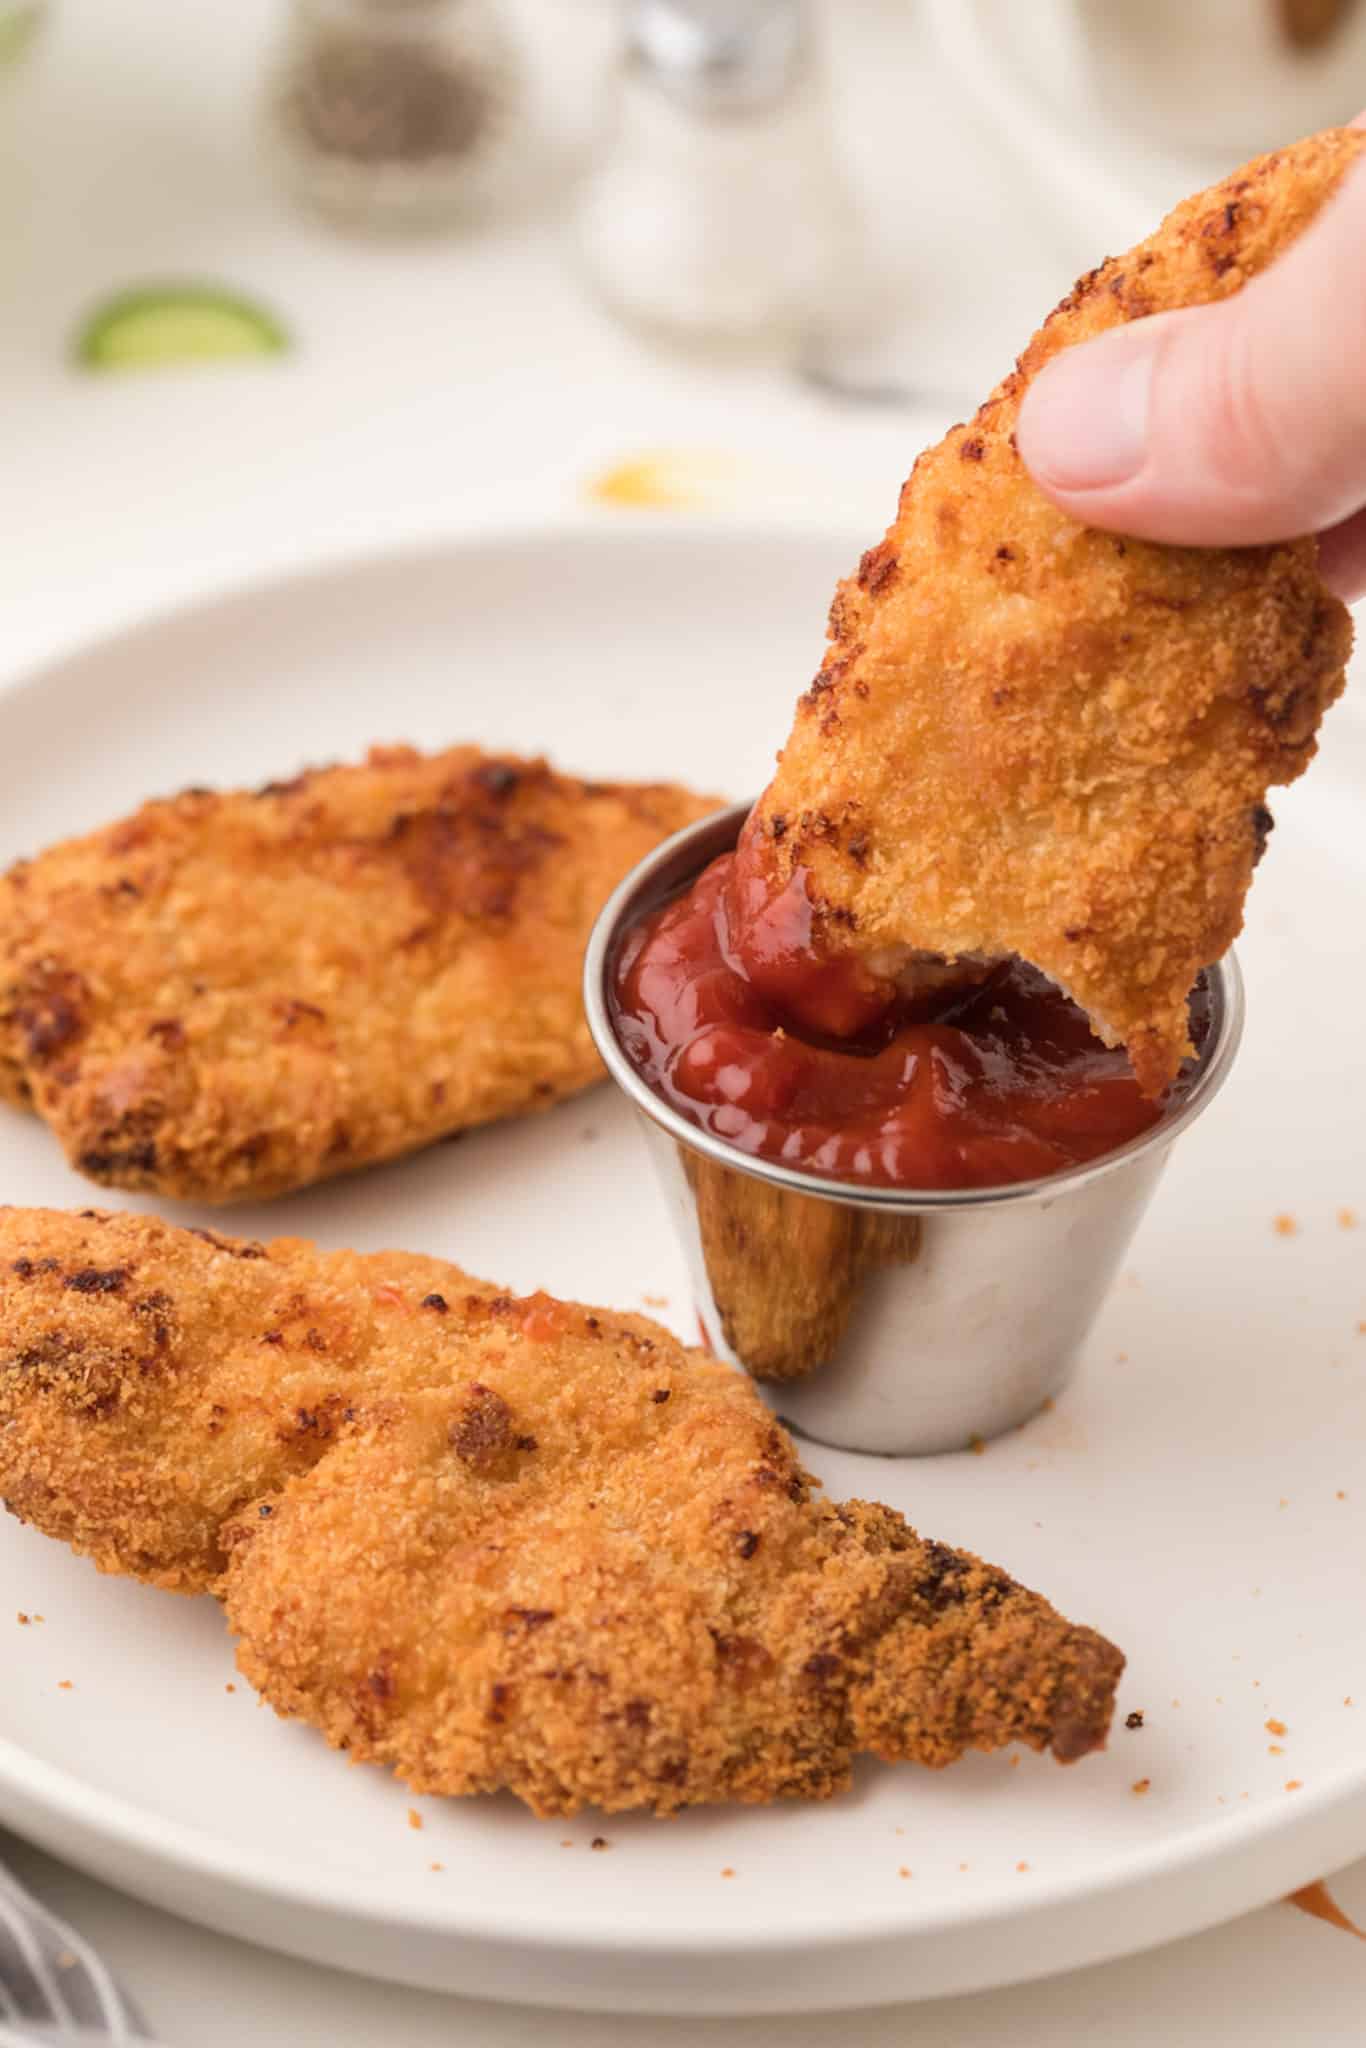 Dipping a chicken tender in ketchup